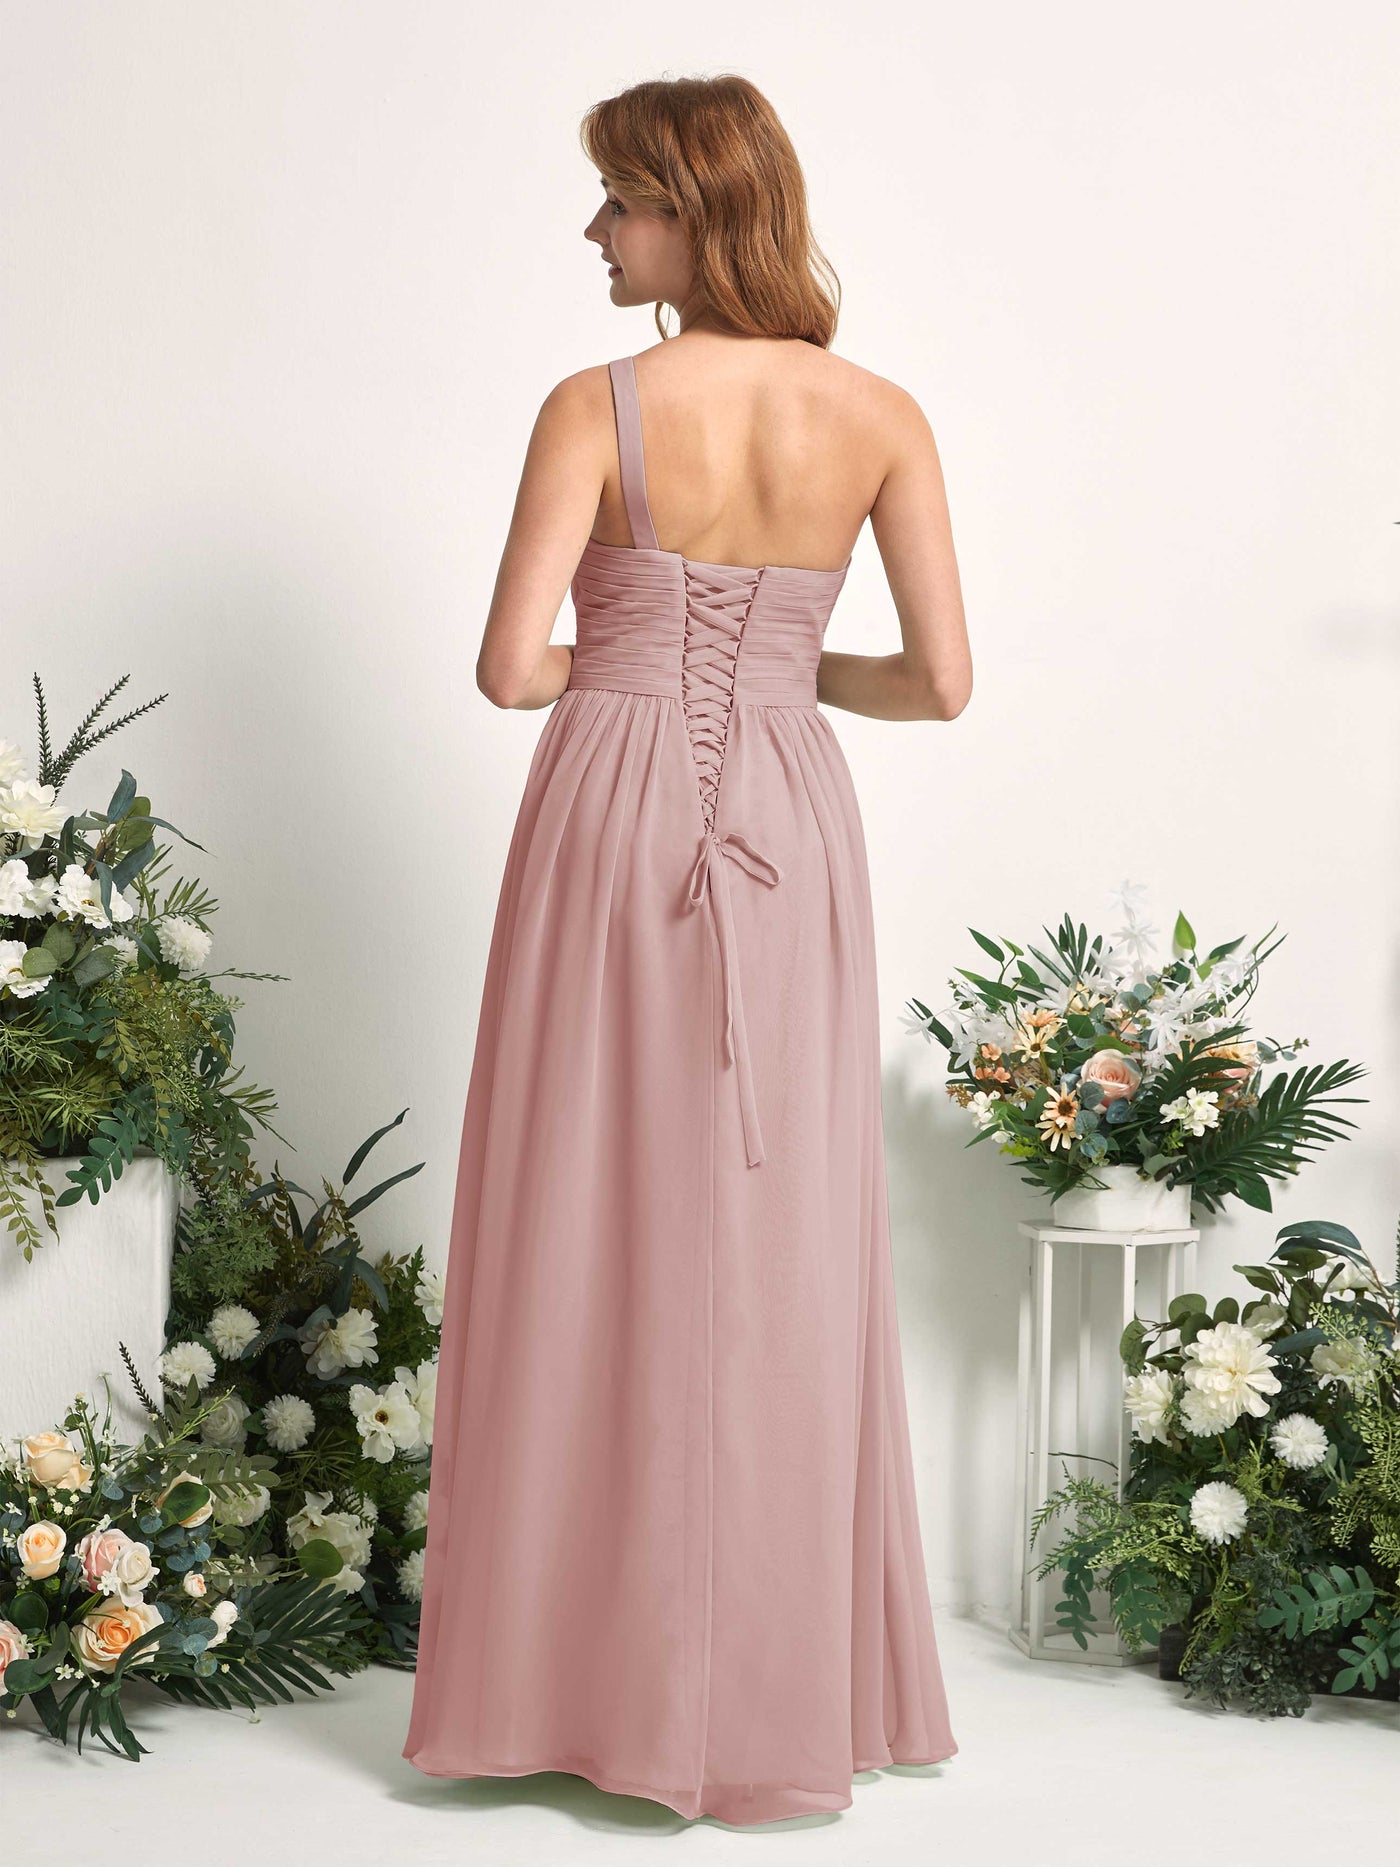 Bridesmaid Dress A-line Chiffon One Shoulder Full Length Sleeveless Wedding Party Dress - Dusty Rose (81226709)#color_dusty-rose